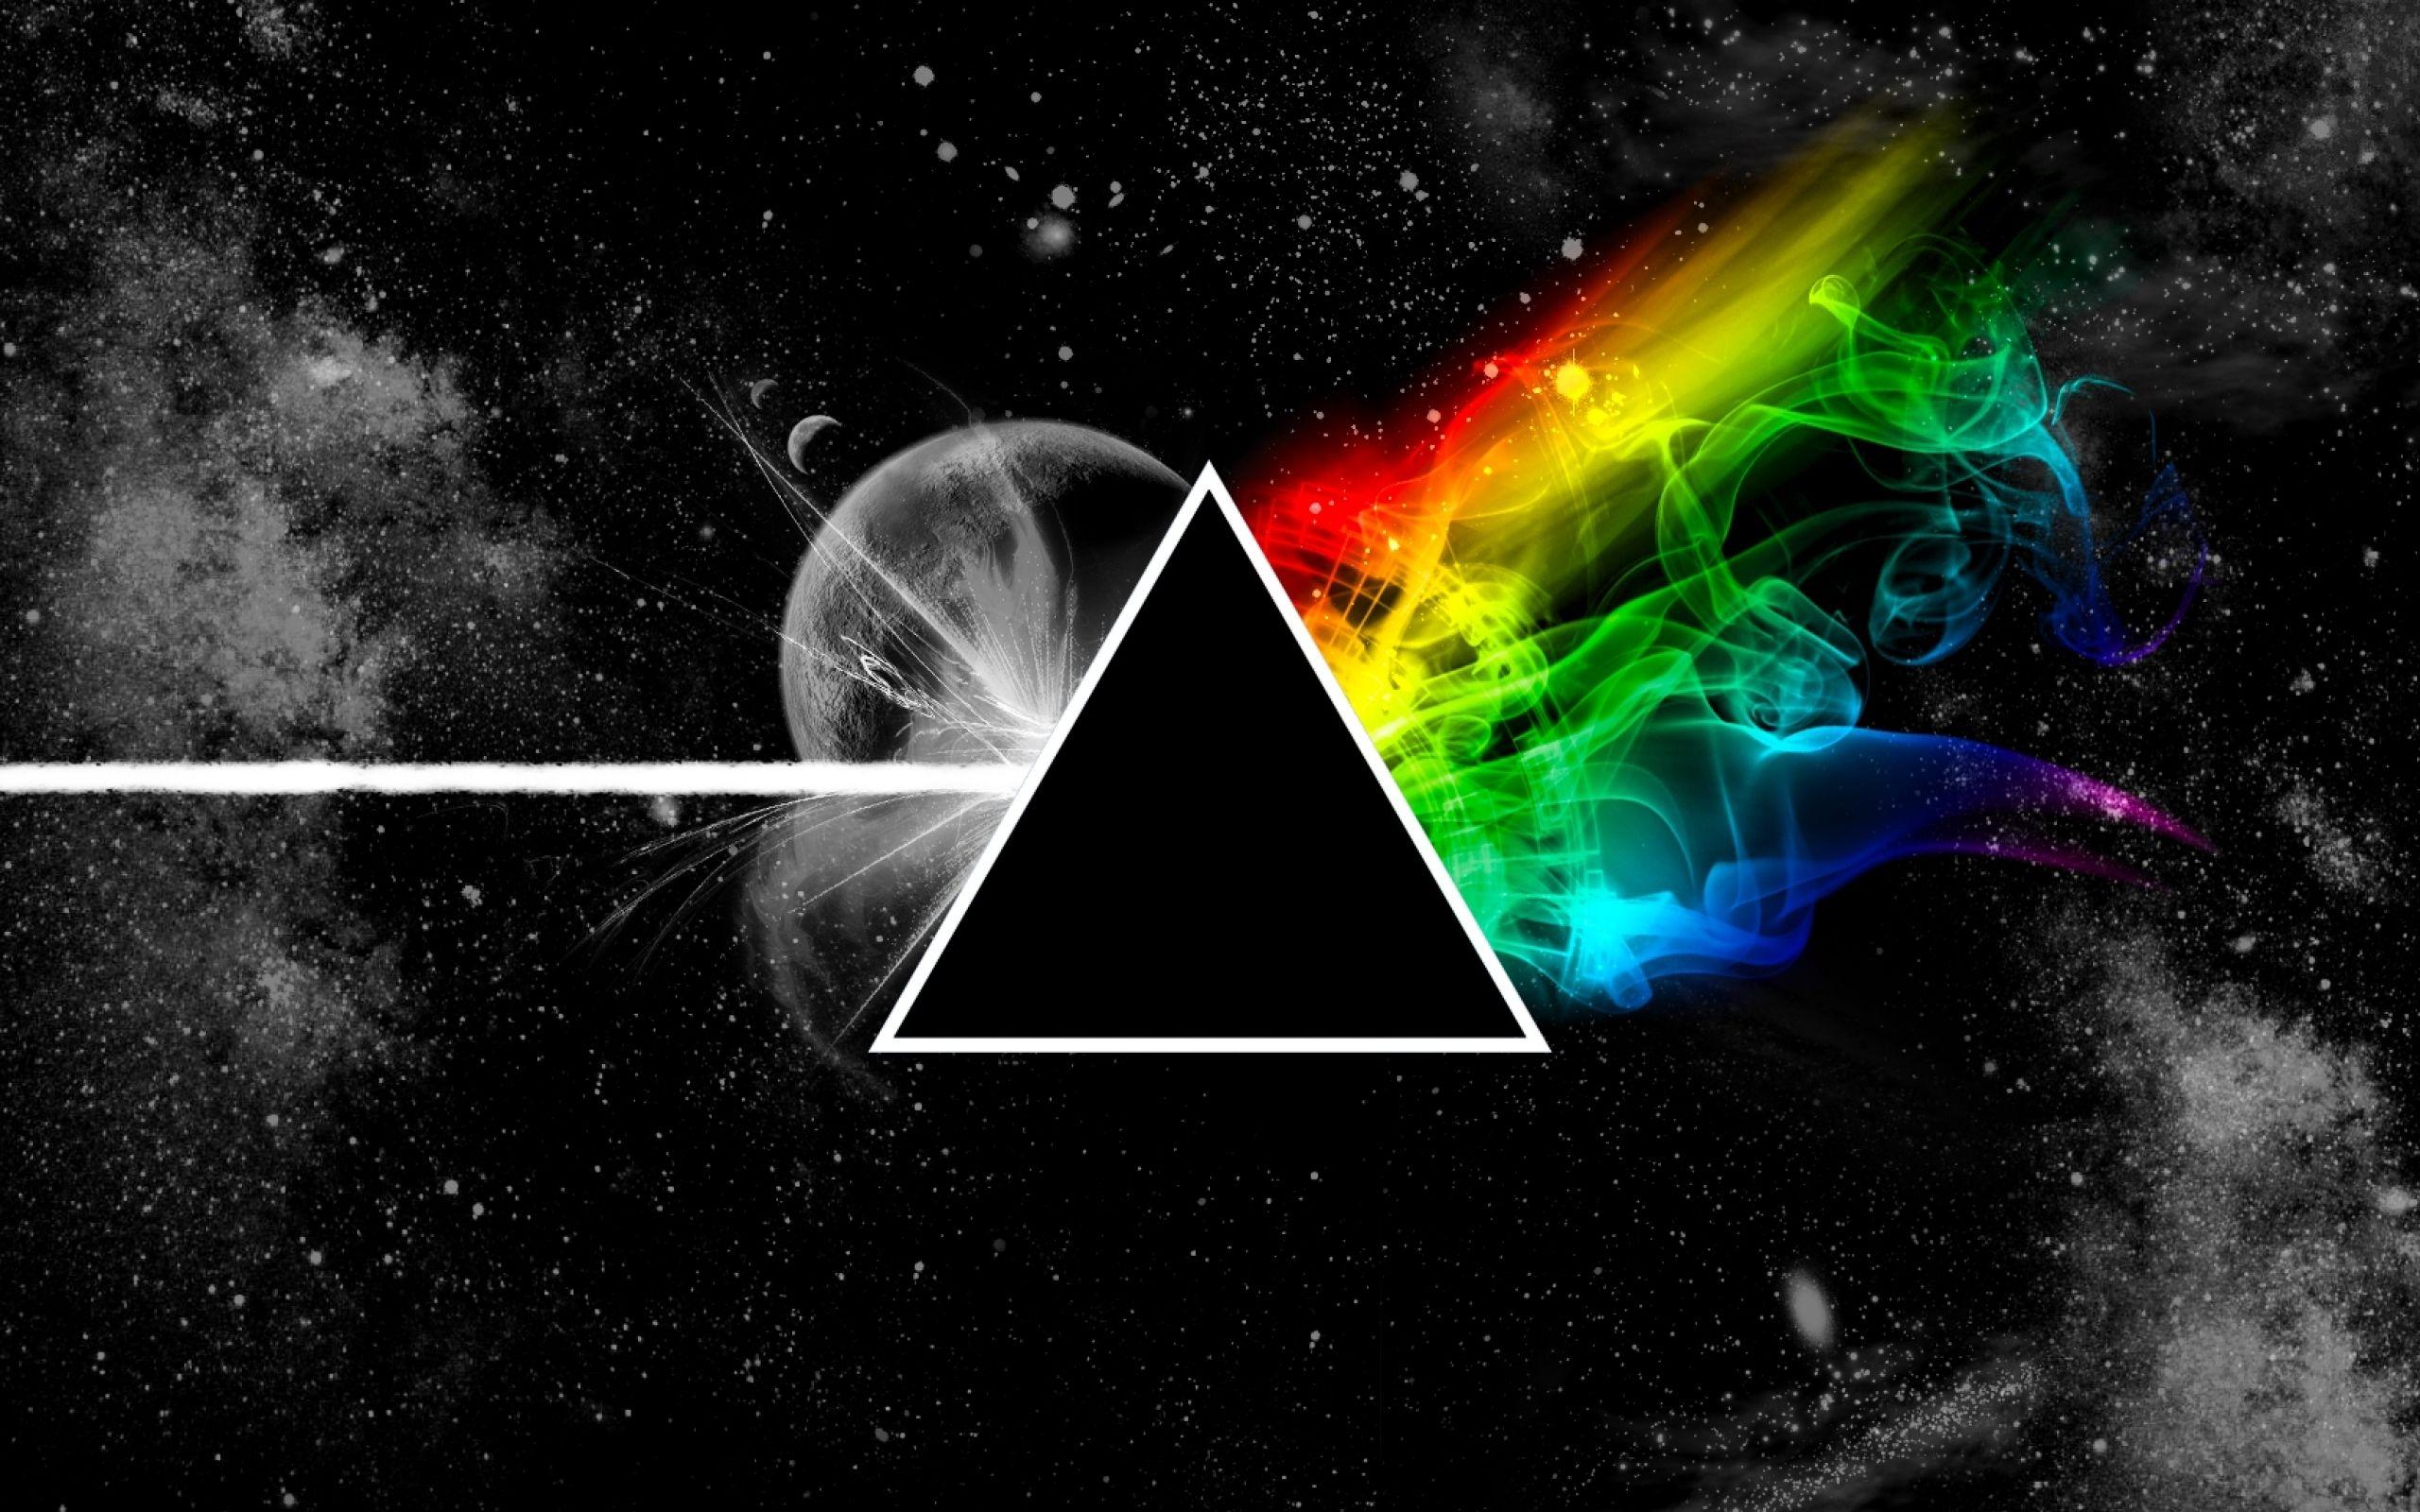 Dark Side of the Moon. Andrew J Rivers